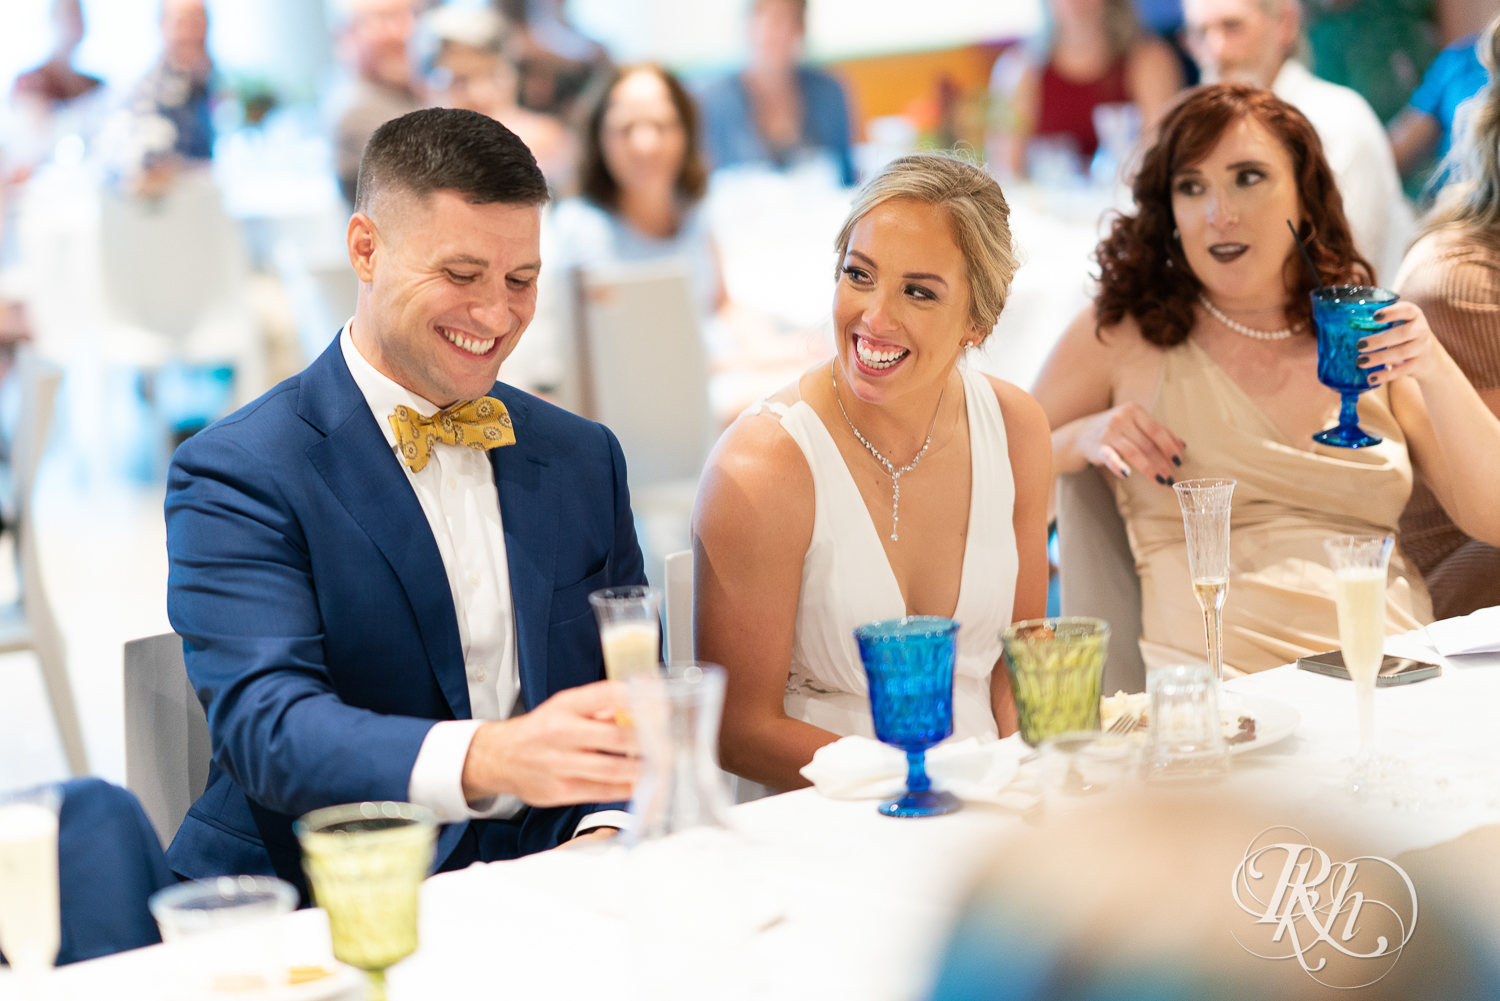 Bride and groom smiling during wedding reception at head table at Saint Paul Event Center in Saint Paul, Minnesota.